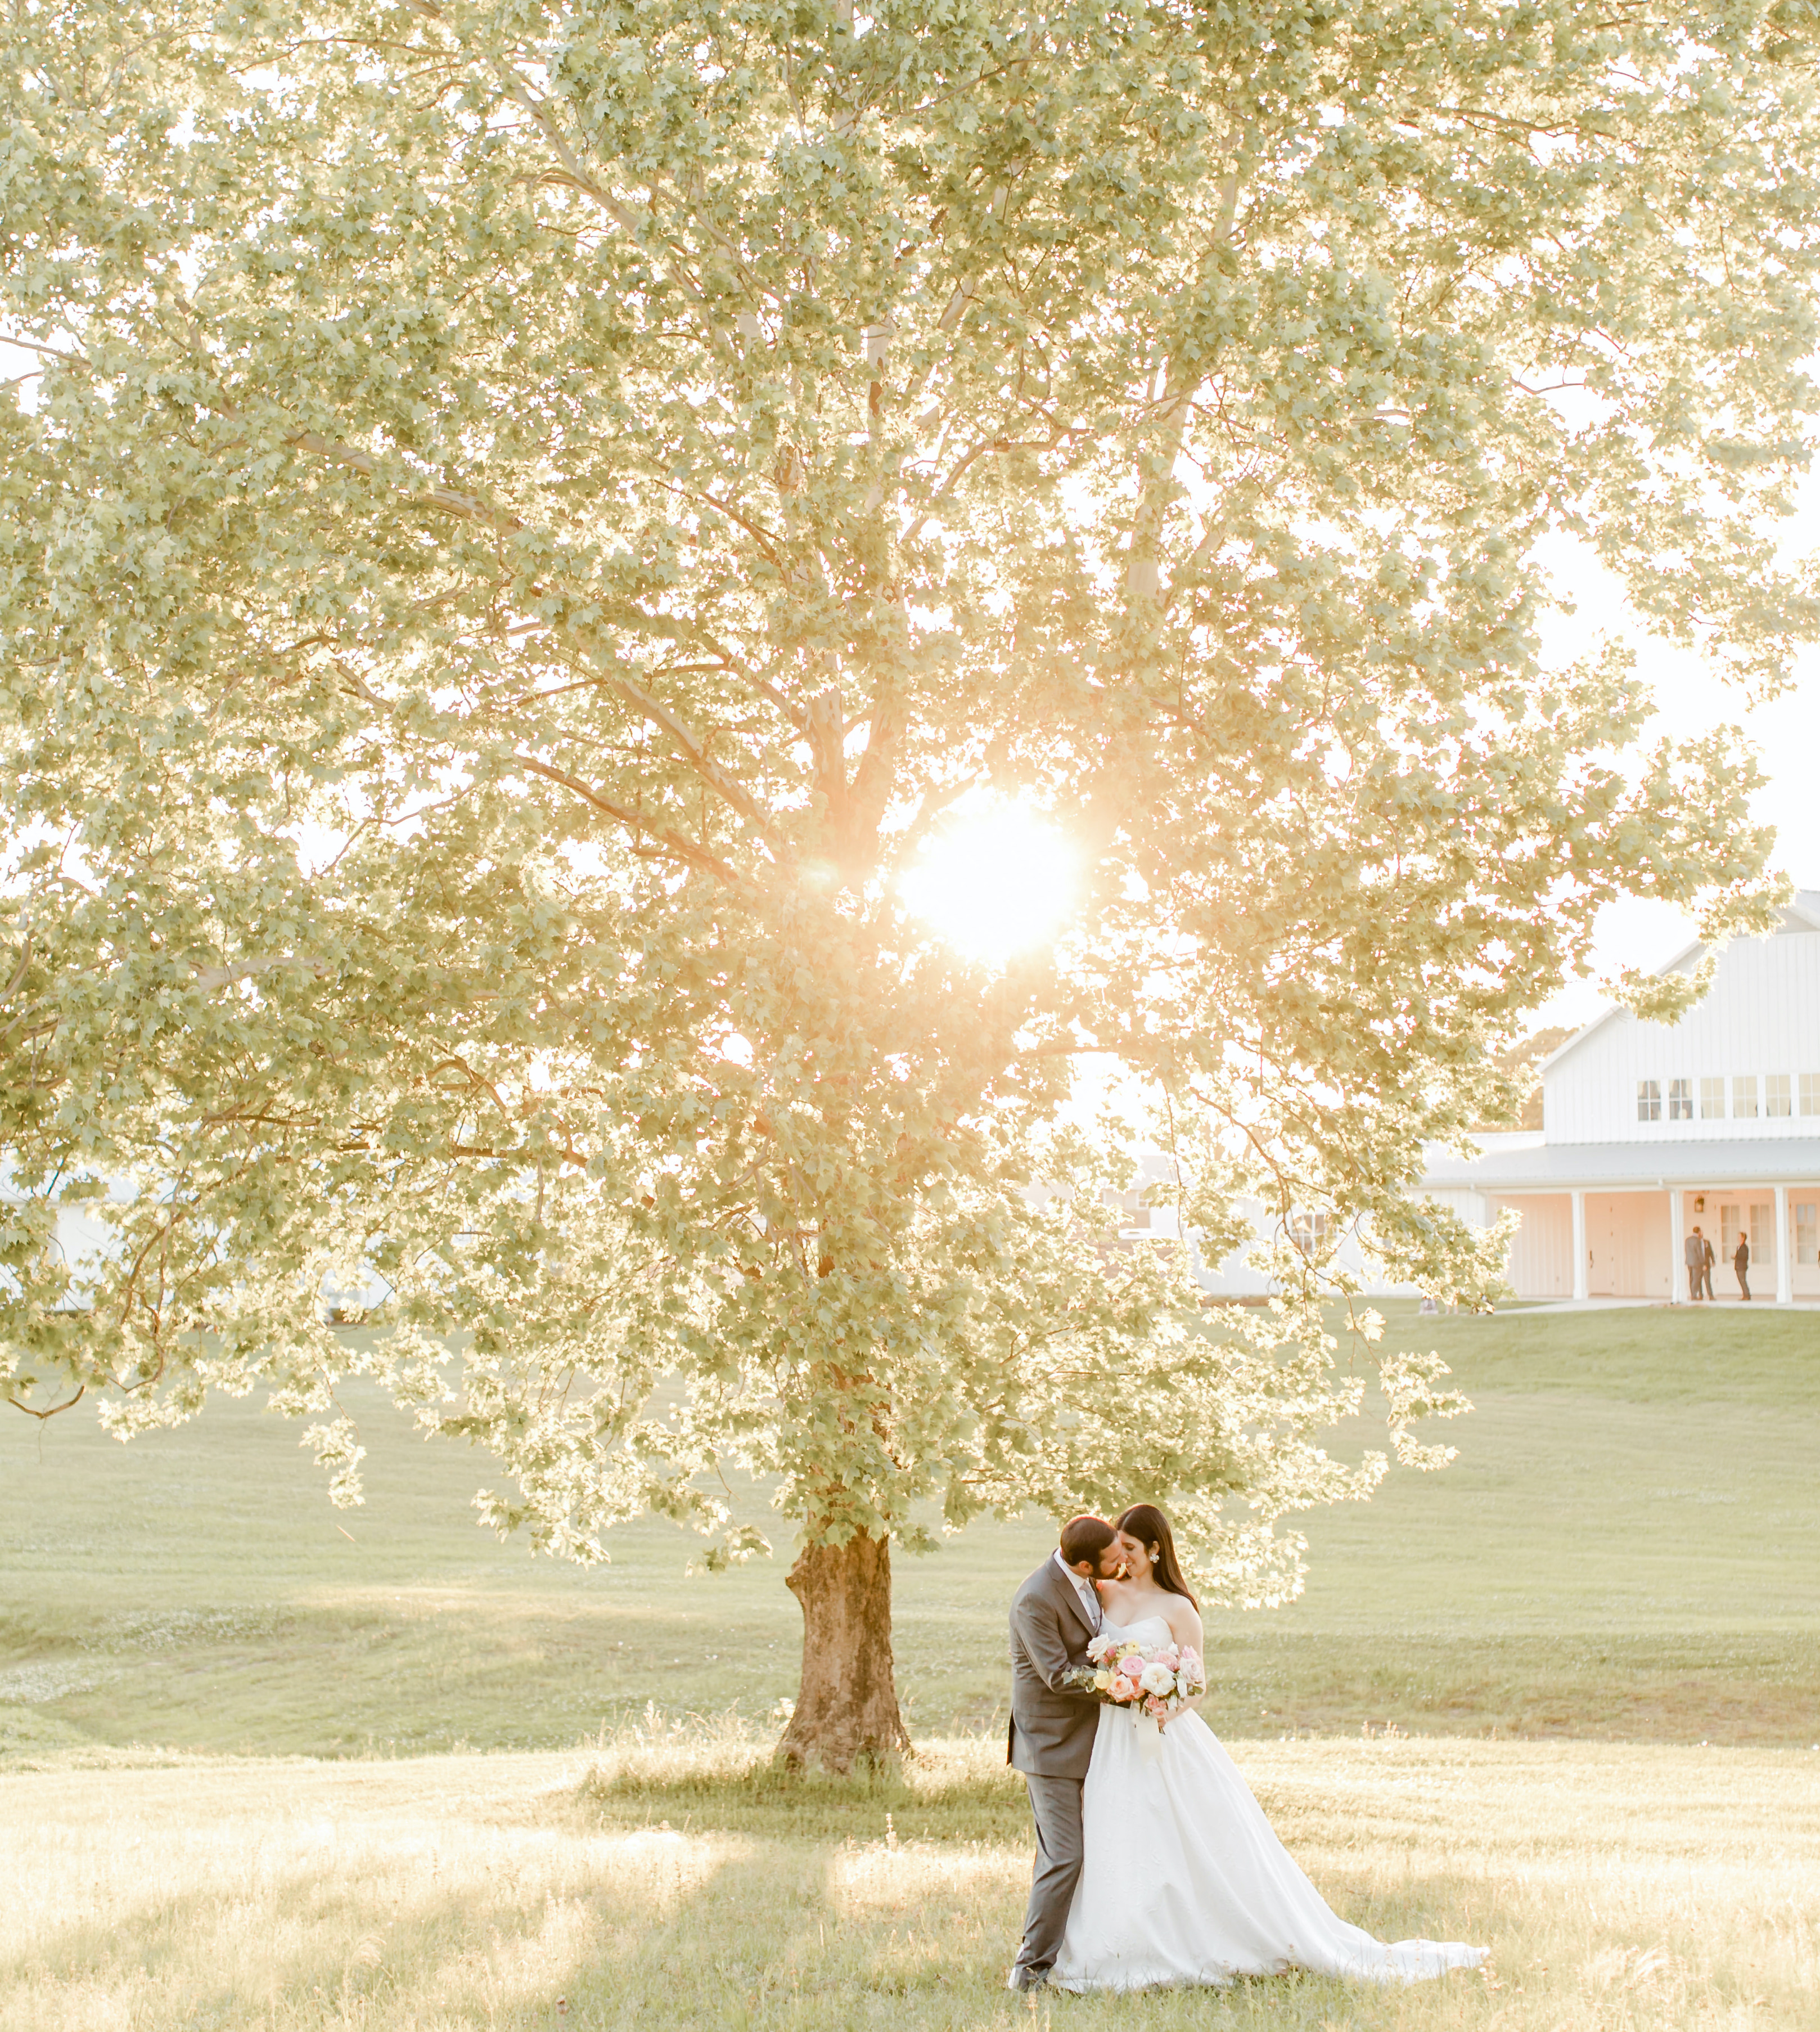 The bride and groom embrace under an oak tree with the sun shining through.